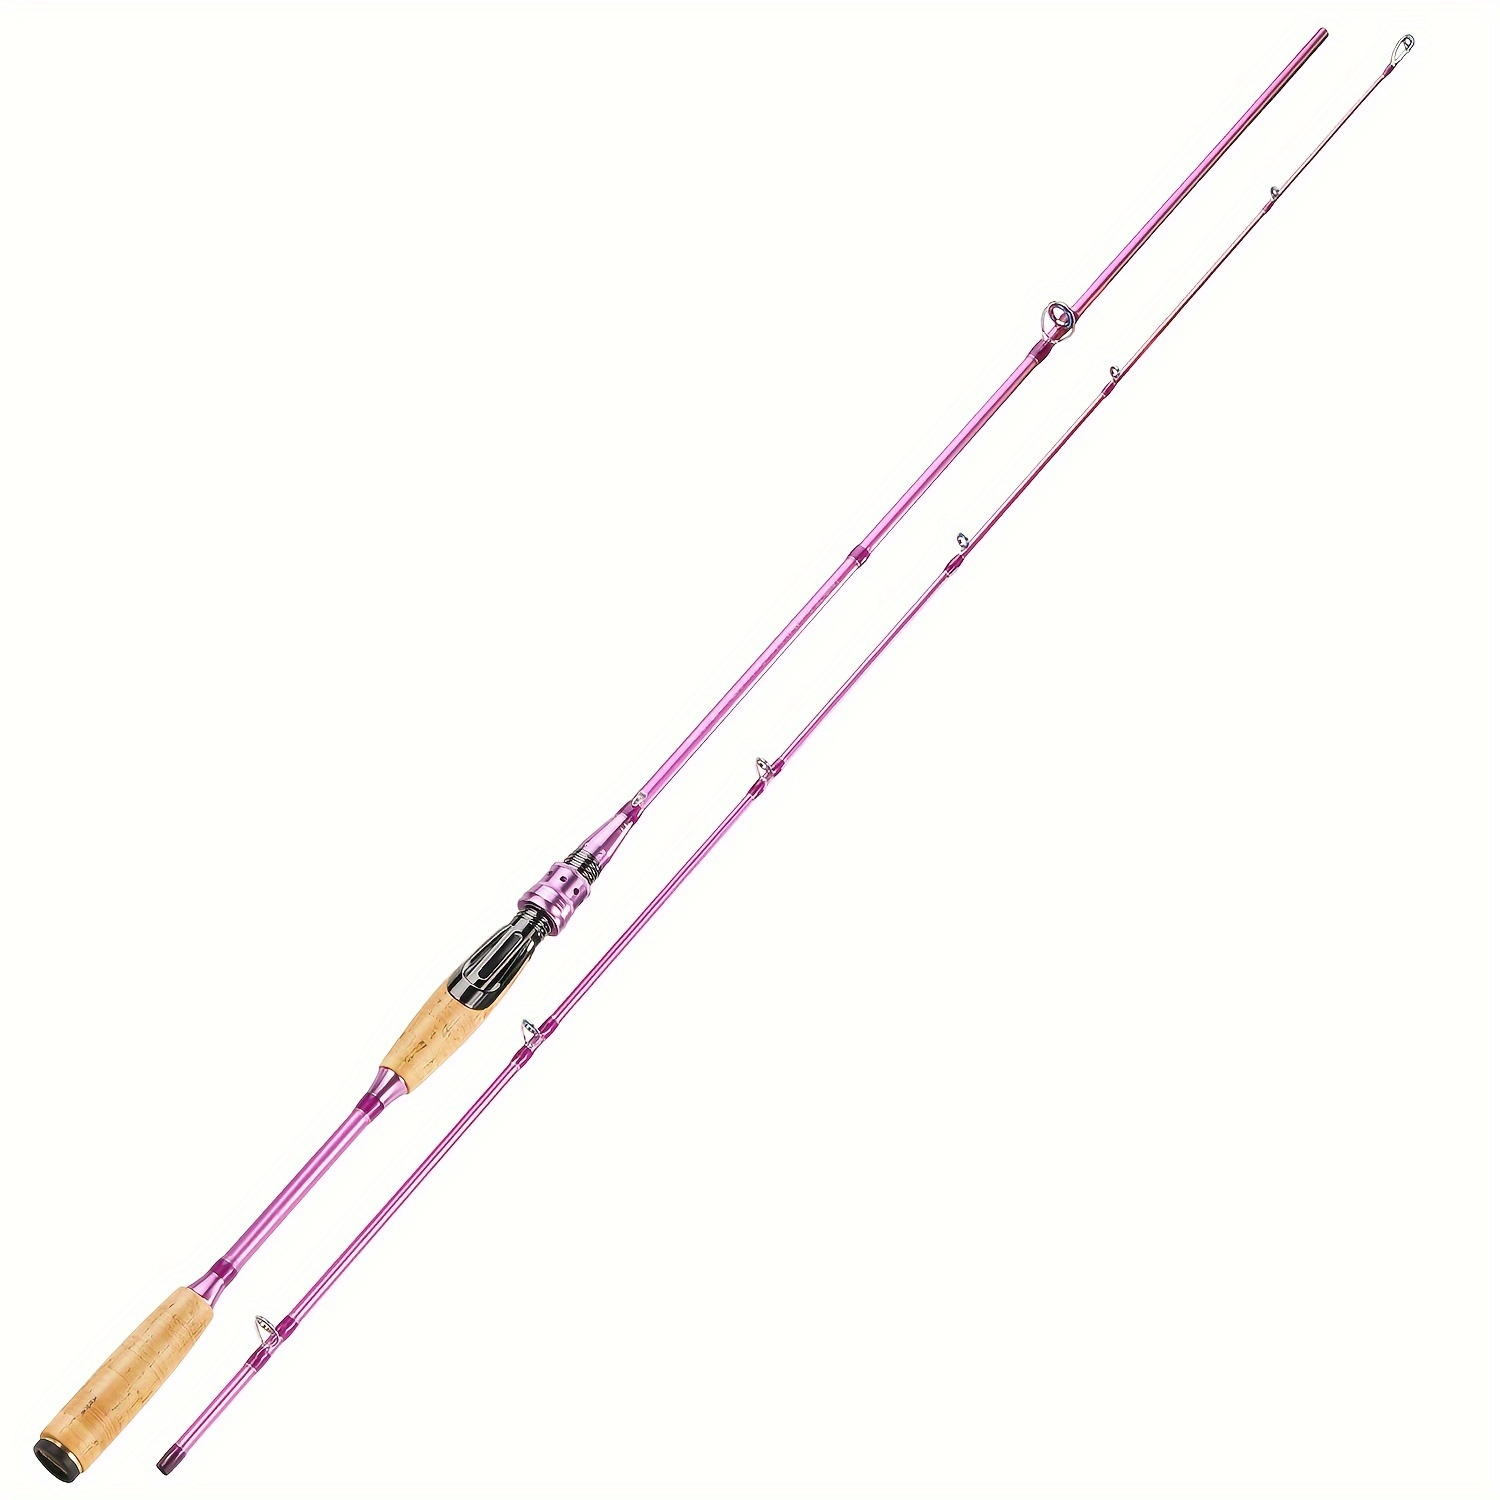 Sougayilang 2Pc Fishing Rod, Spinning Rod and Casting Rod Fishing Bass  Freshwater-Purple-1.8m-Spinning : : Sports, Fitness & Outdoors